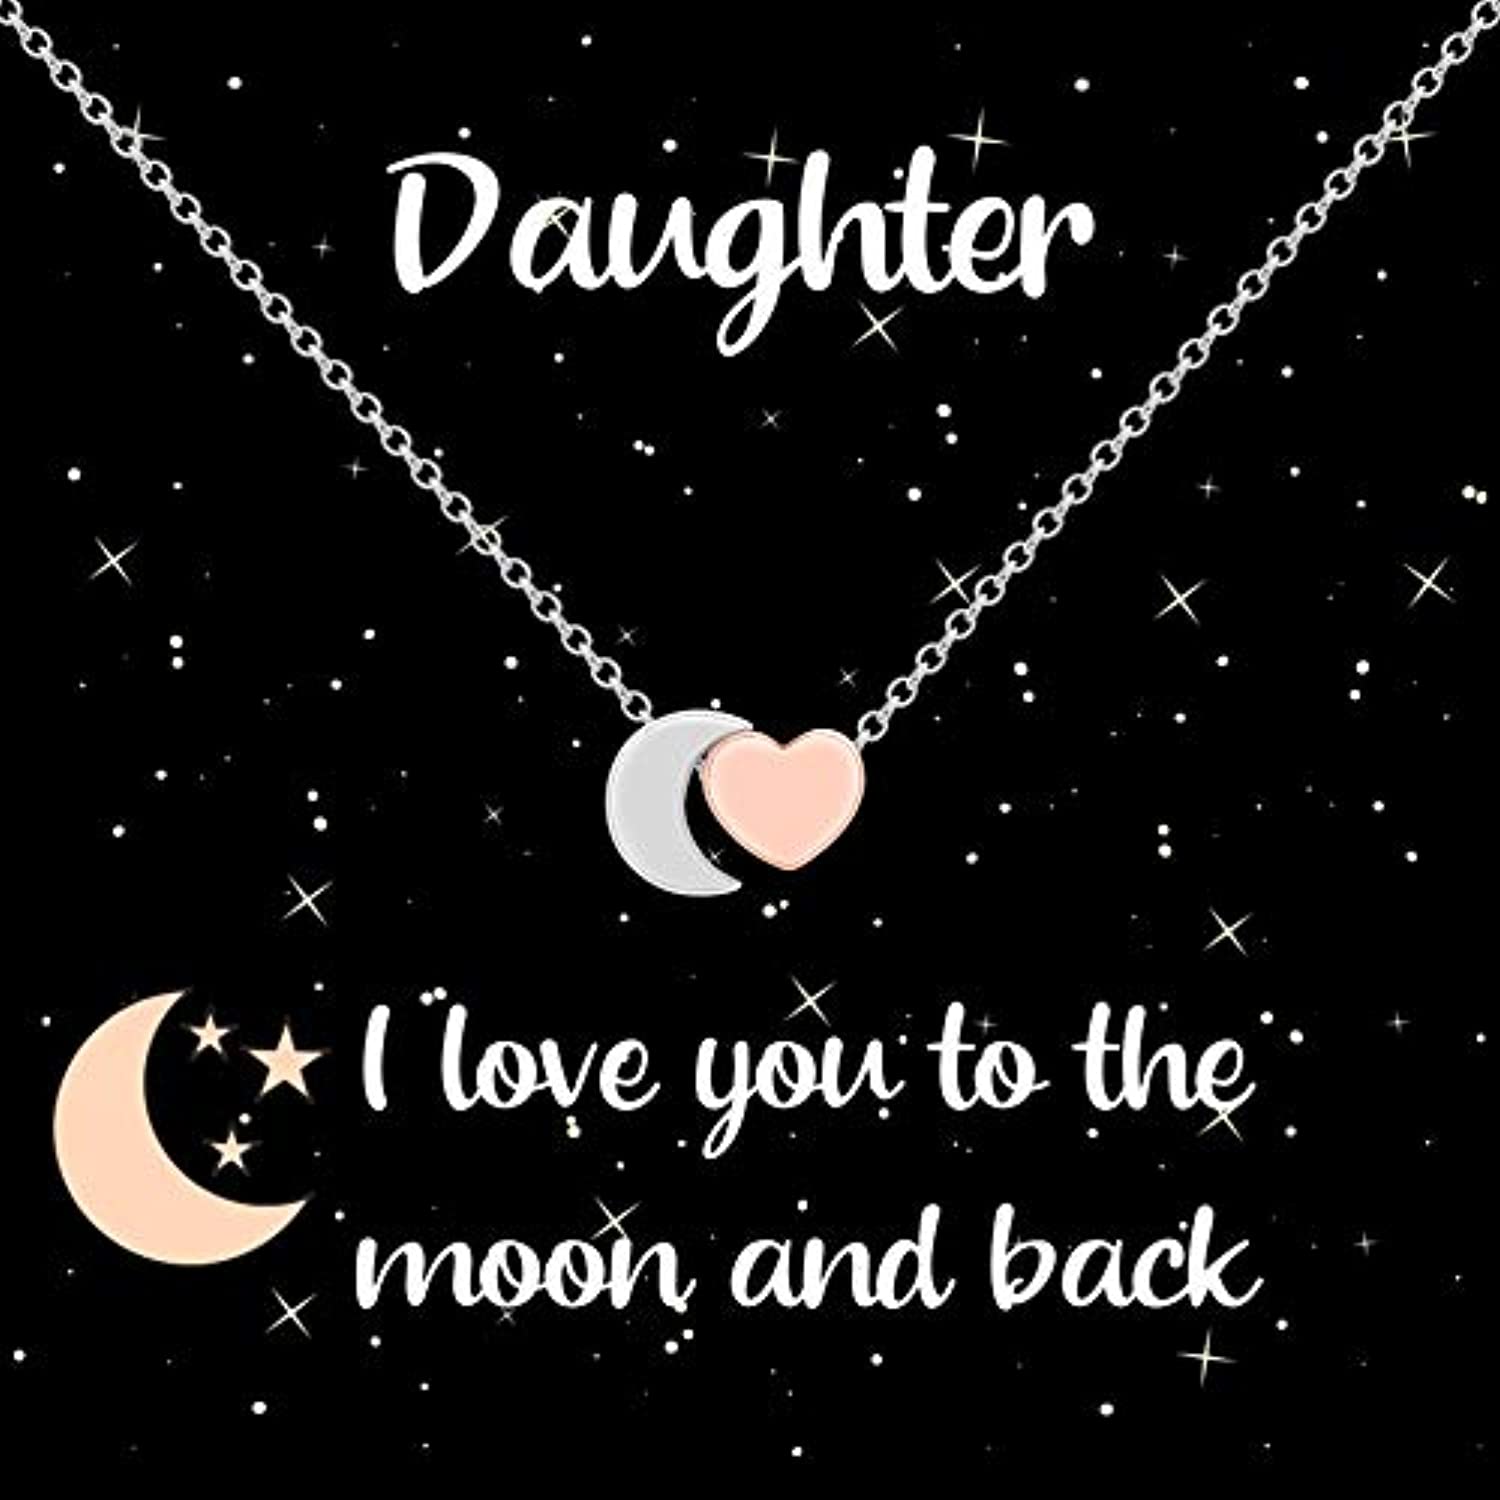 Daughter Jewelry Necklace Gift from Mom, Dad I Love You To The Moon and Back Heart & Moon Pendant Necklace, Jewelry Presents from Mother/Father Girls, Teens, Women, Adults (2-Tone Rose/Silver) - image 1 of 5